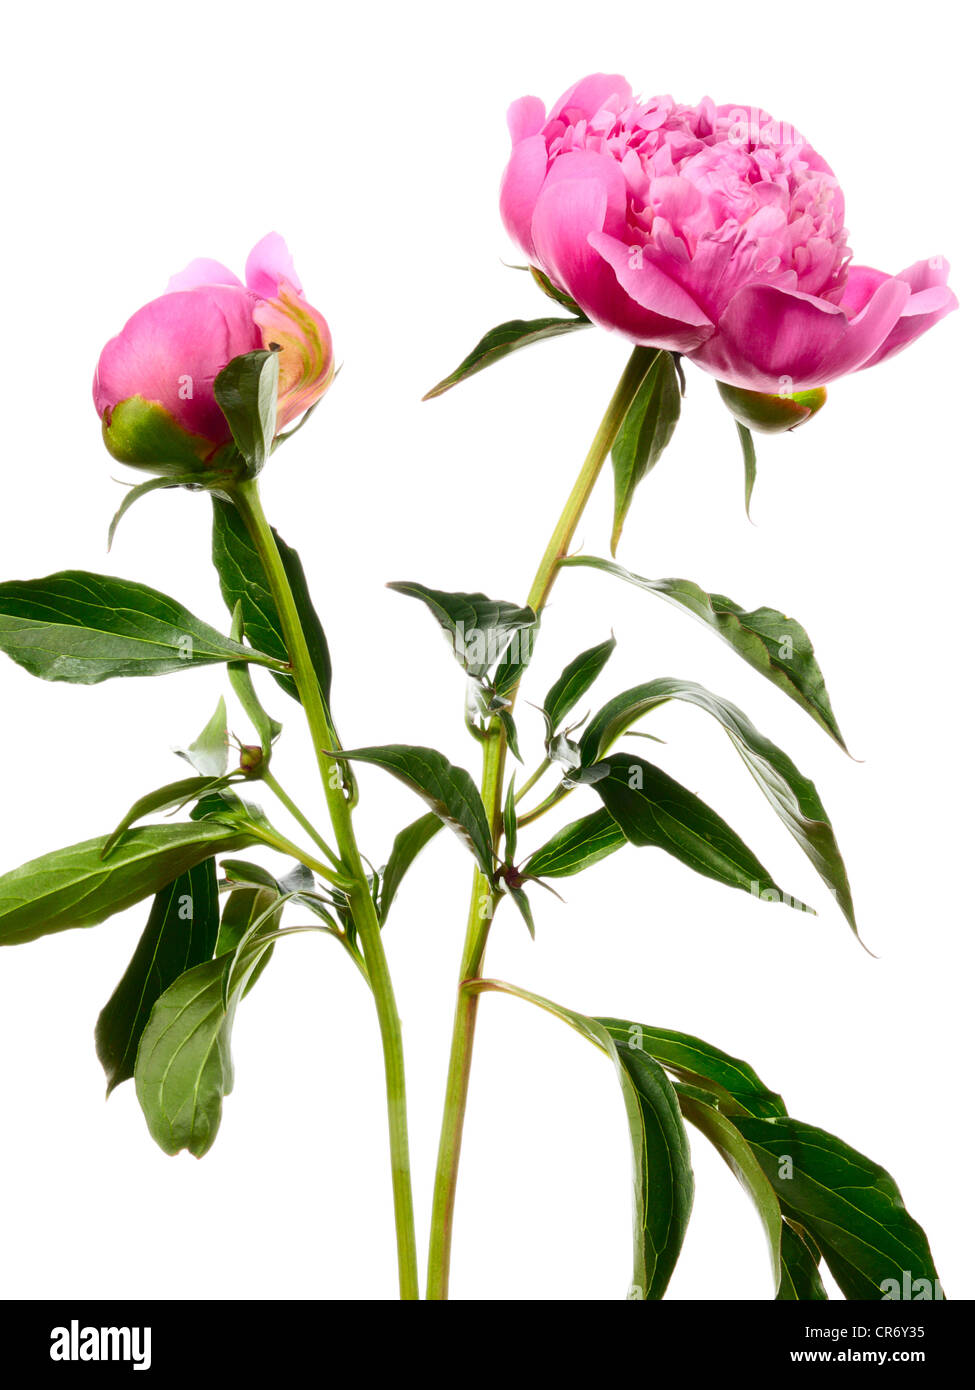 Peony. Two pink flowers isolated on white Stock Photo